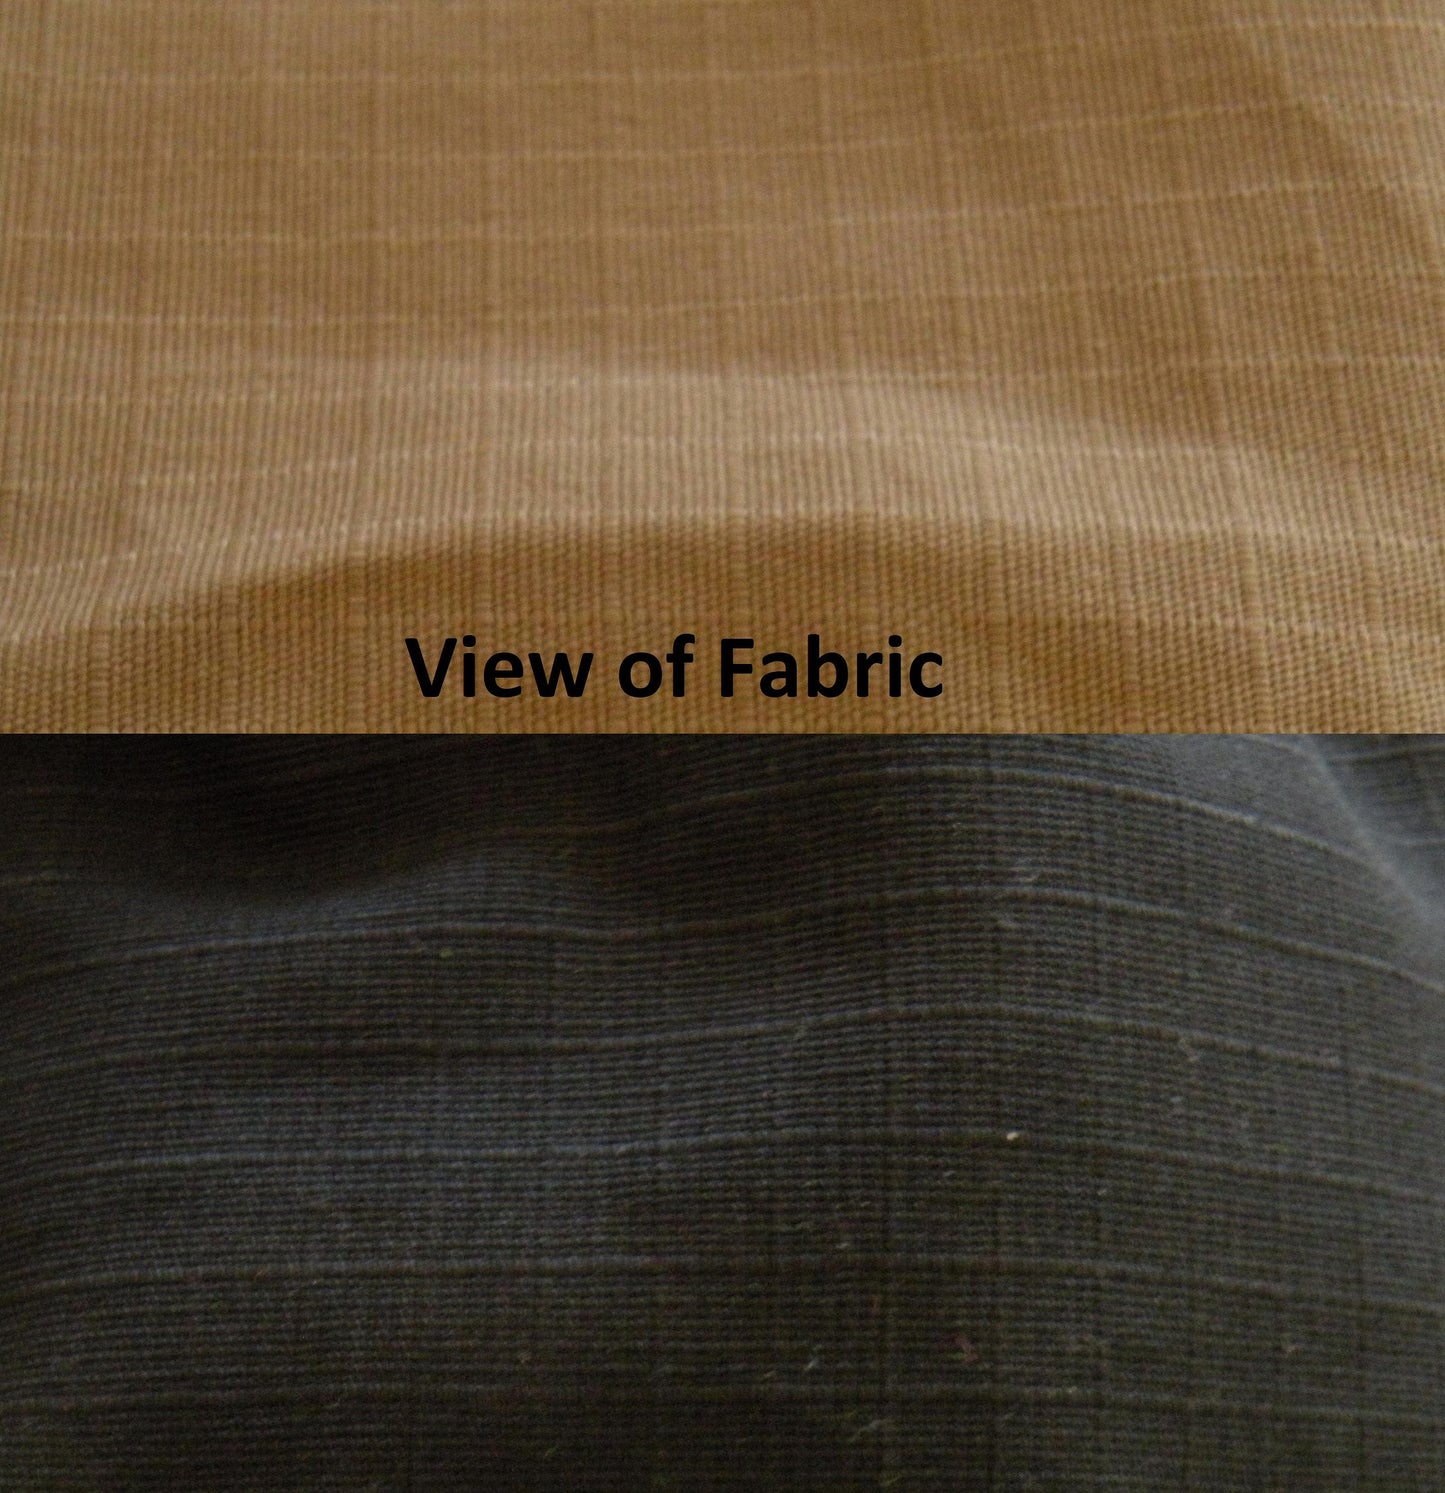 fabric color tan and black 100% cotton ripstop